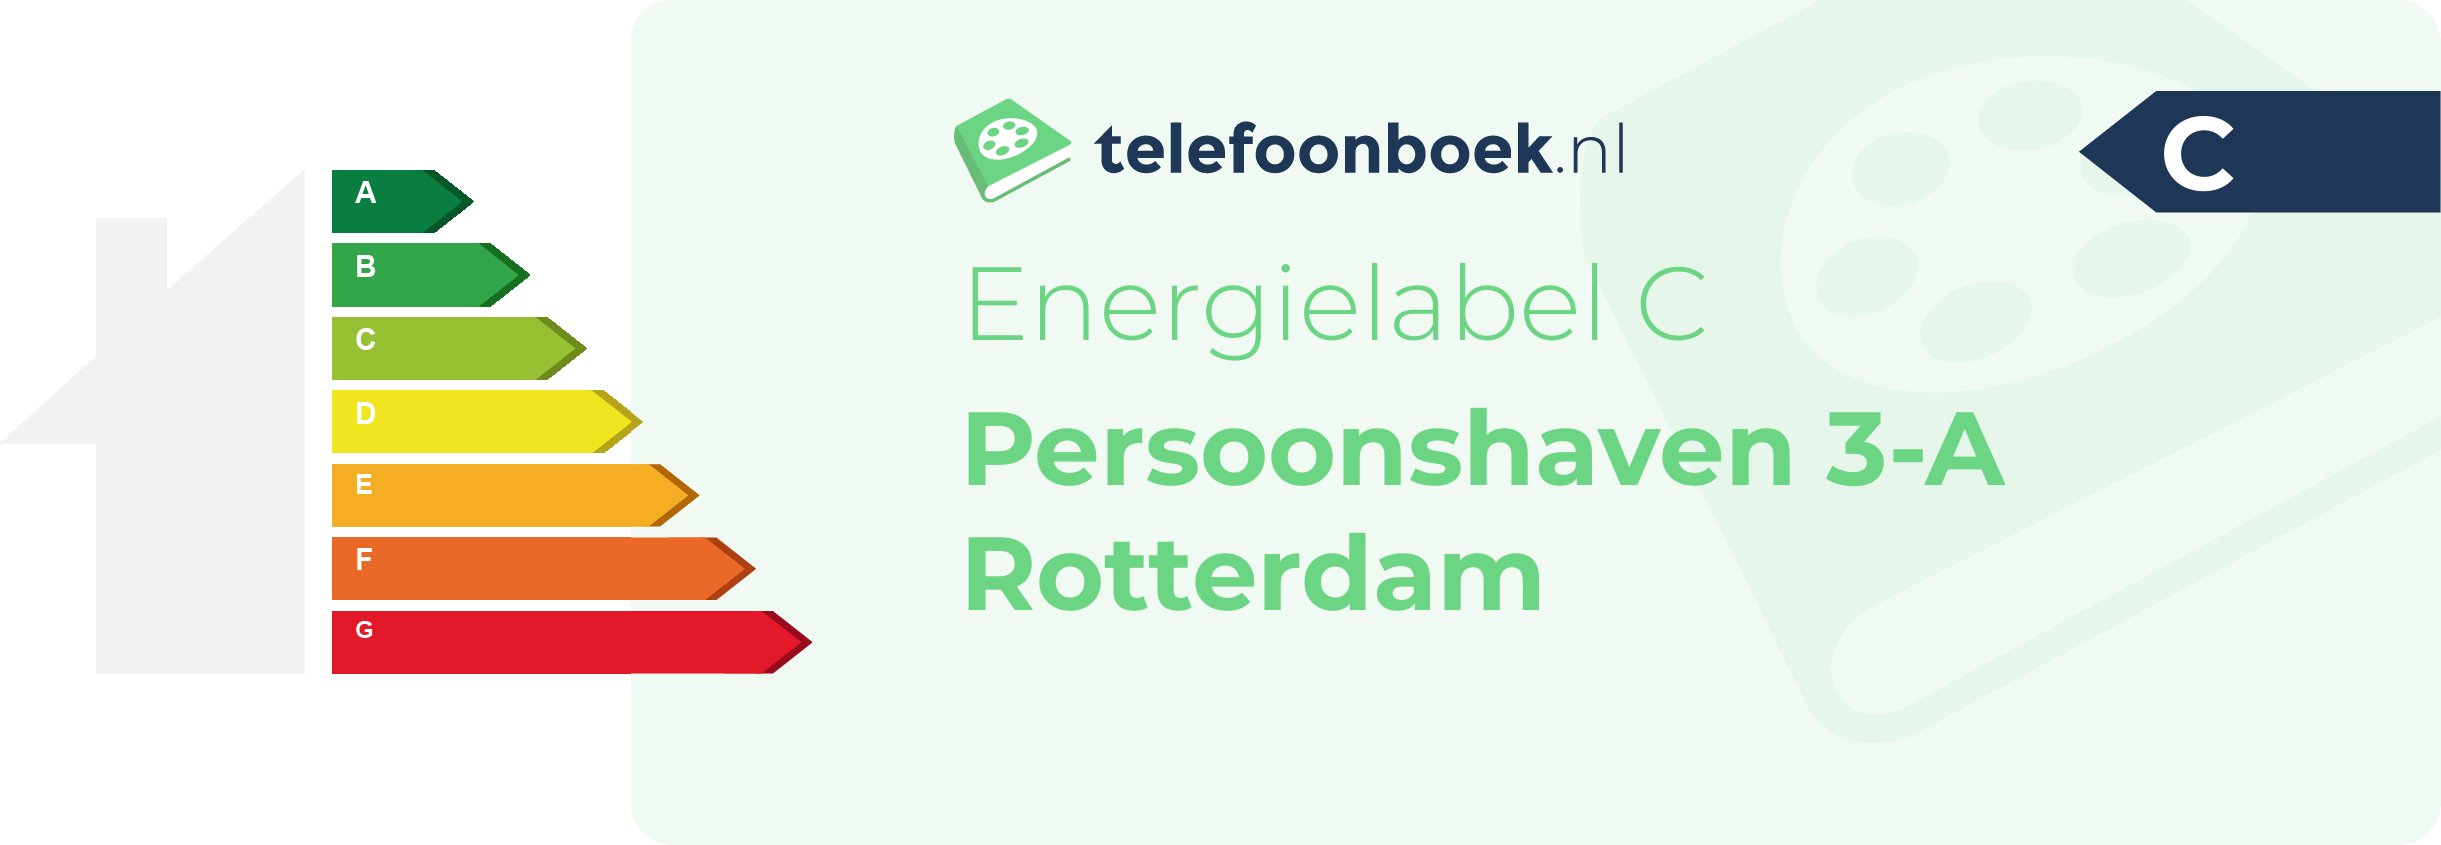 Energielabel Persoonshaven 3-A Rotterdam